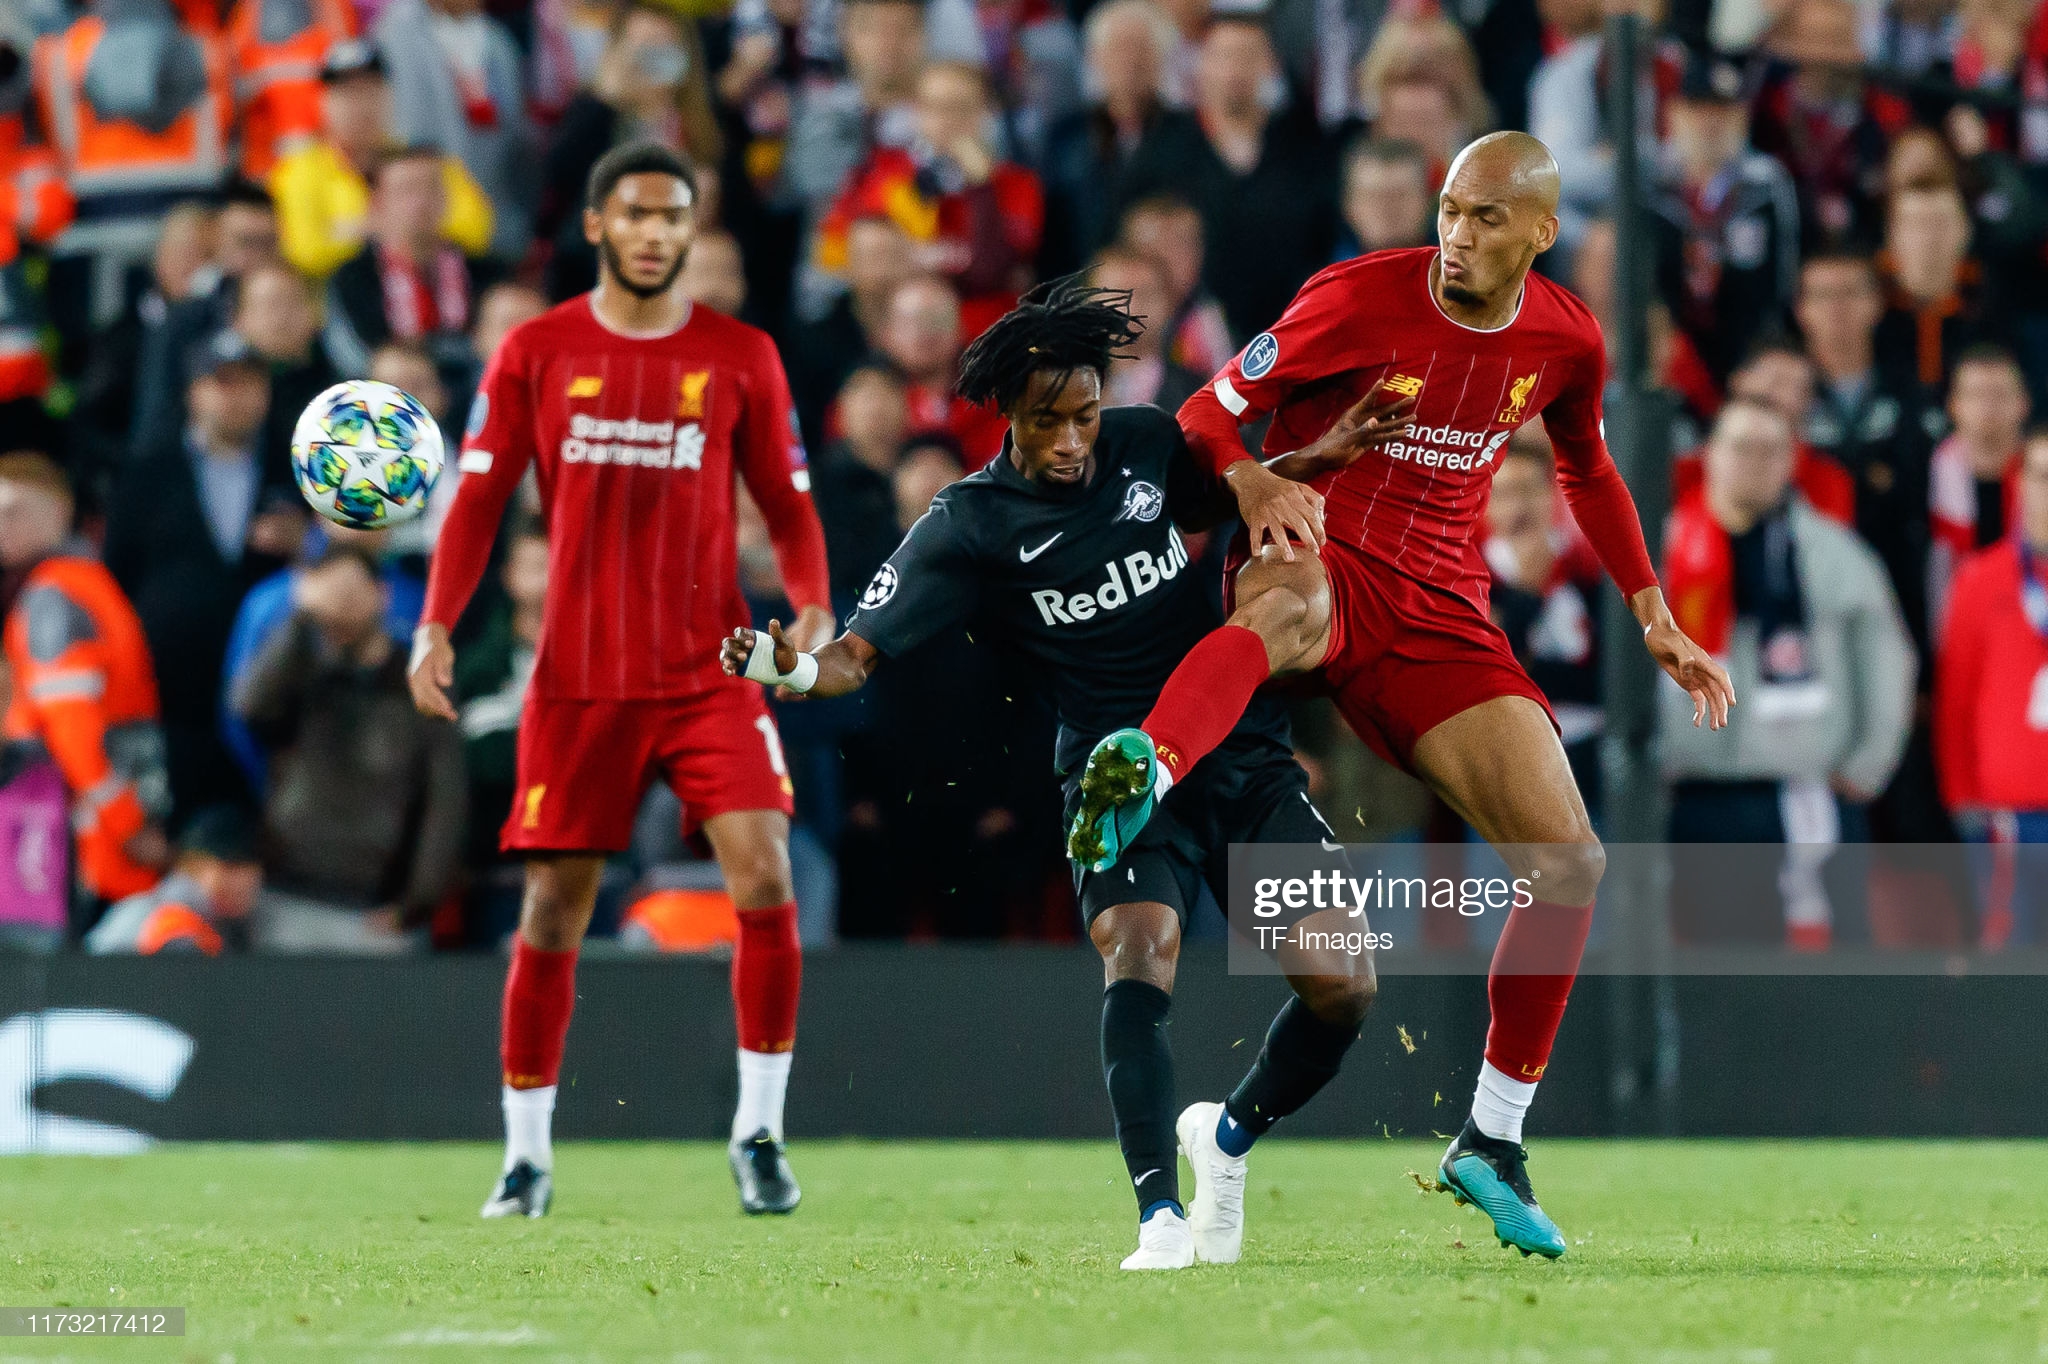 'Playing at Anfield was a proud moment for me' - Majeed Ashimeru rekindles memories of first UCL game